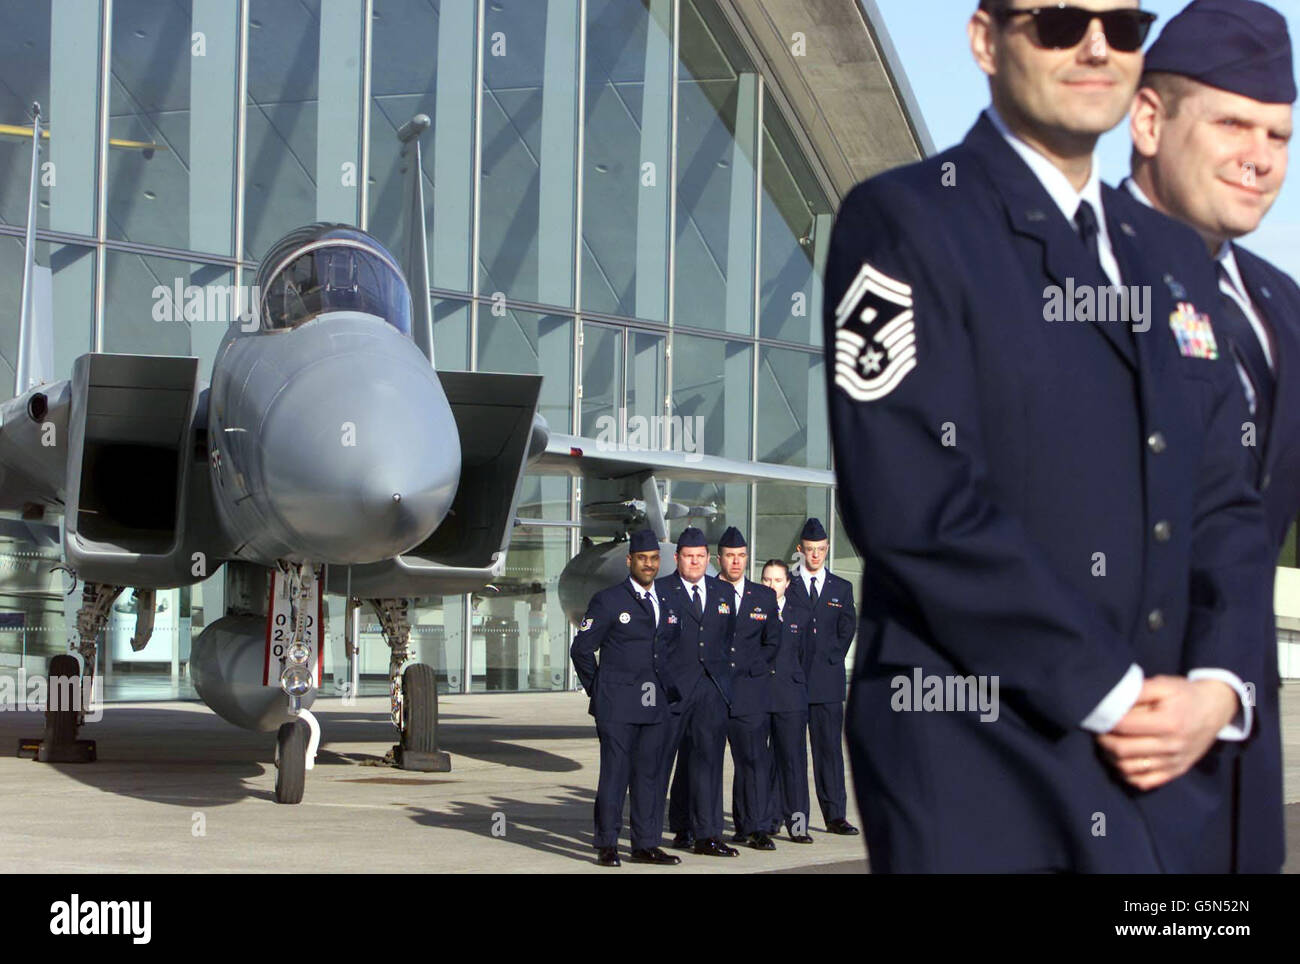 Members of the USAF 48th Fighter Wing from RAF Lakenheath in Suffolk, stand in front of the F15a Eagle jet fighter which they volunteered to restore, at the Duxford Air Museum, Cambridgeshire. The extraordinary 30.1 million exhibit was donated to the museum, * by the USAF but required restoration before it could go on display. The F-15 provided the backbone of the United States Air Force's fighting capabilities in the 1990's. Stock Photo